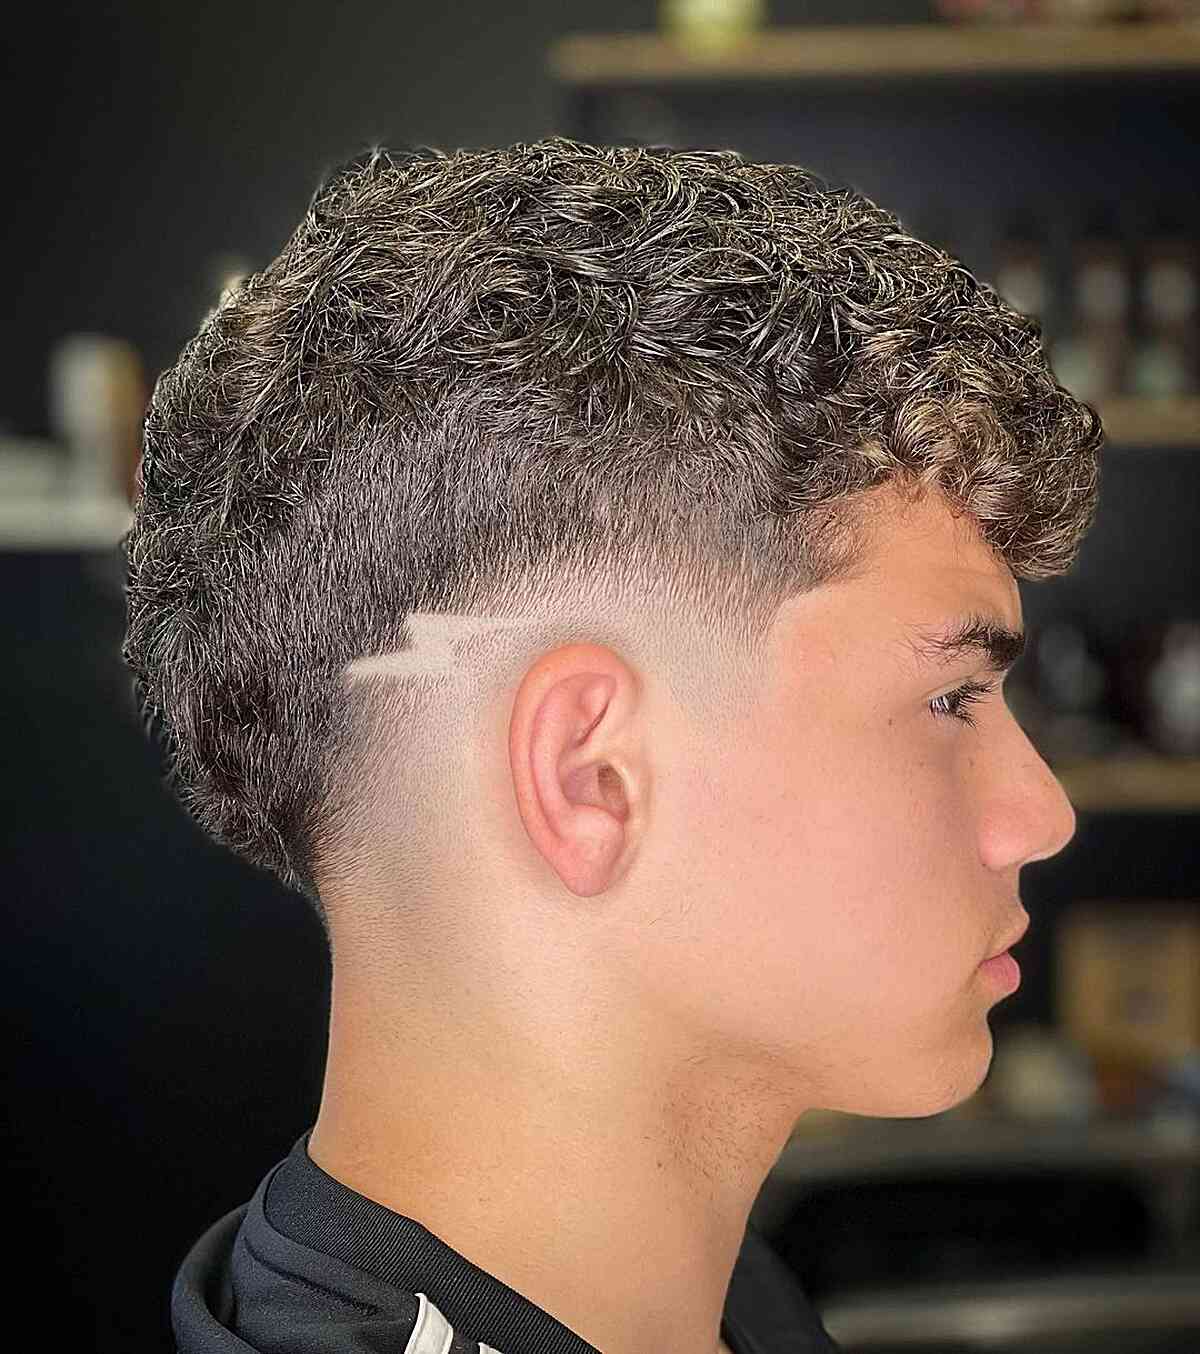 Taper Fade Haircut with a Lighting Bolt Design